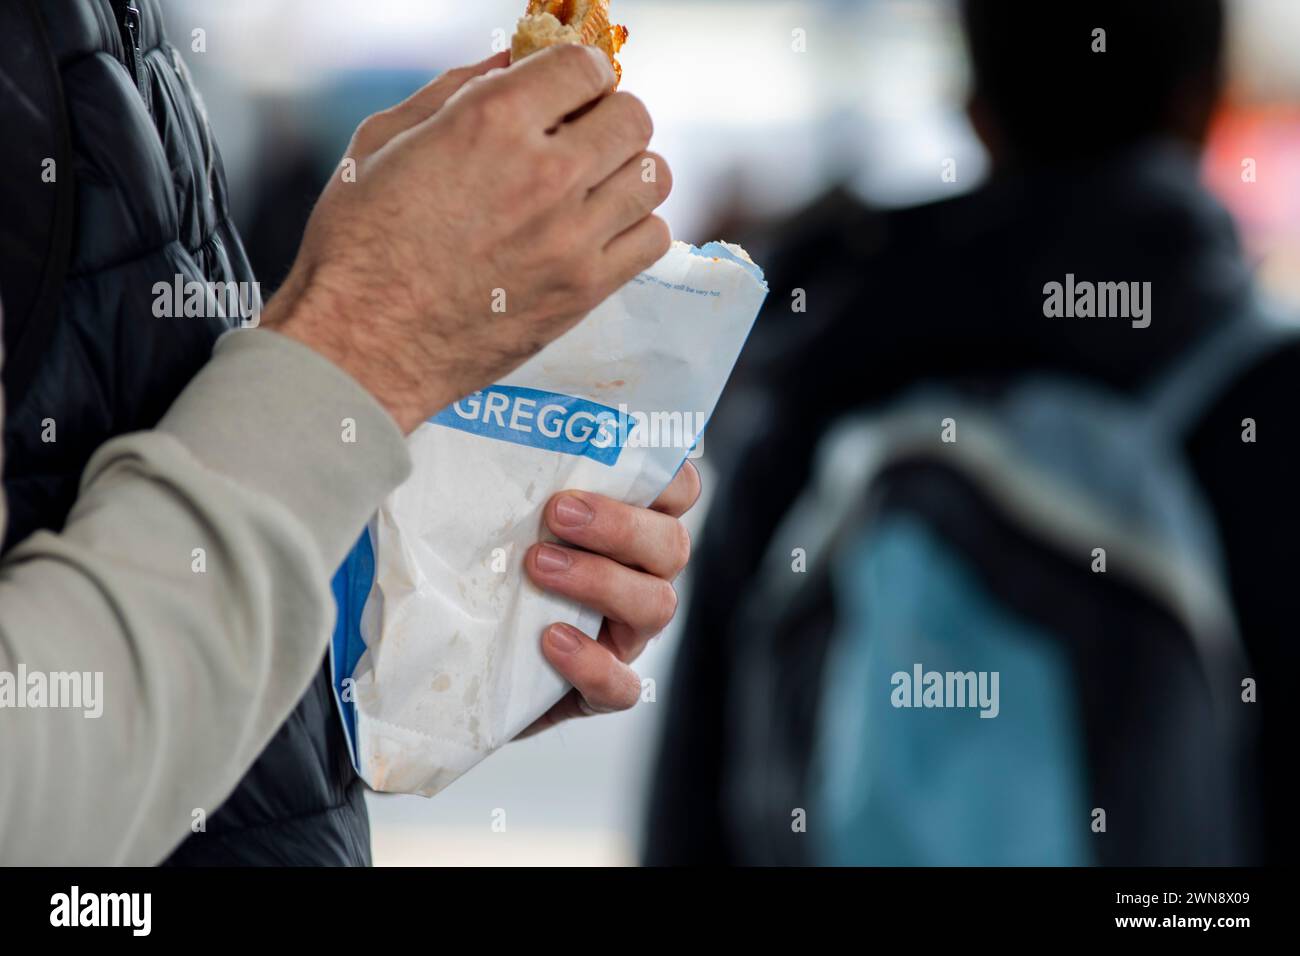 A Greggs bakery customer with a product in a carrier bag with the companies logo displayed as he enjoys the snack on a UK railway station.Greggs plc is a British bakery chain. It specialises in savoury products such as bakes, sausage rolls, sandwiches and sweet items including doughnuts and vanilla slices. It is headquartered in Newcastle upon Tyne, England. It is listed on the London Stock Exchange, and is a constituent of the FTSE 250 Index. Originally a high street chain, it has since entered the convenience and drive-thru markets. Stock Photo